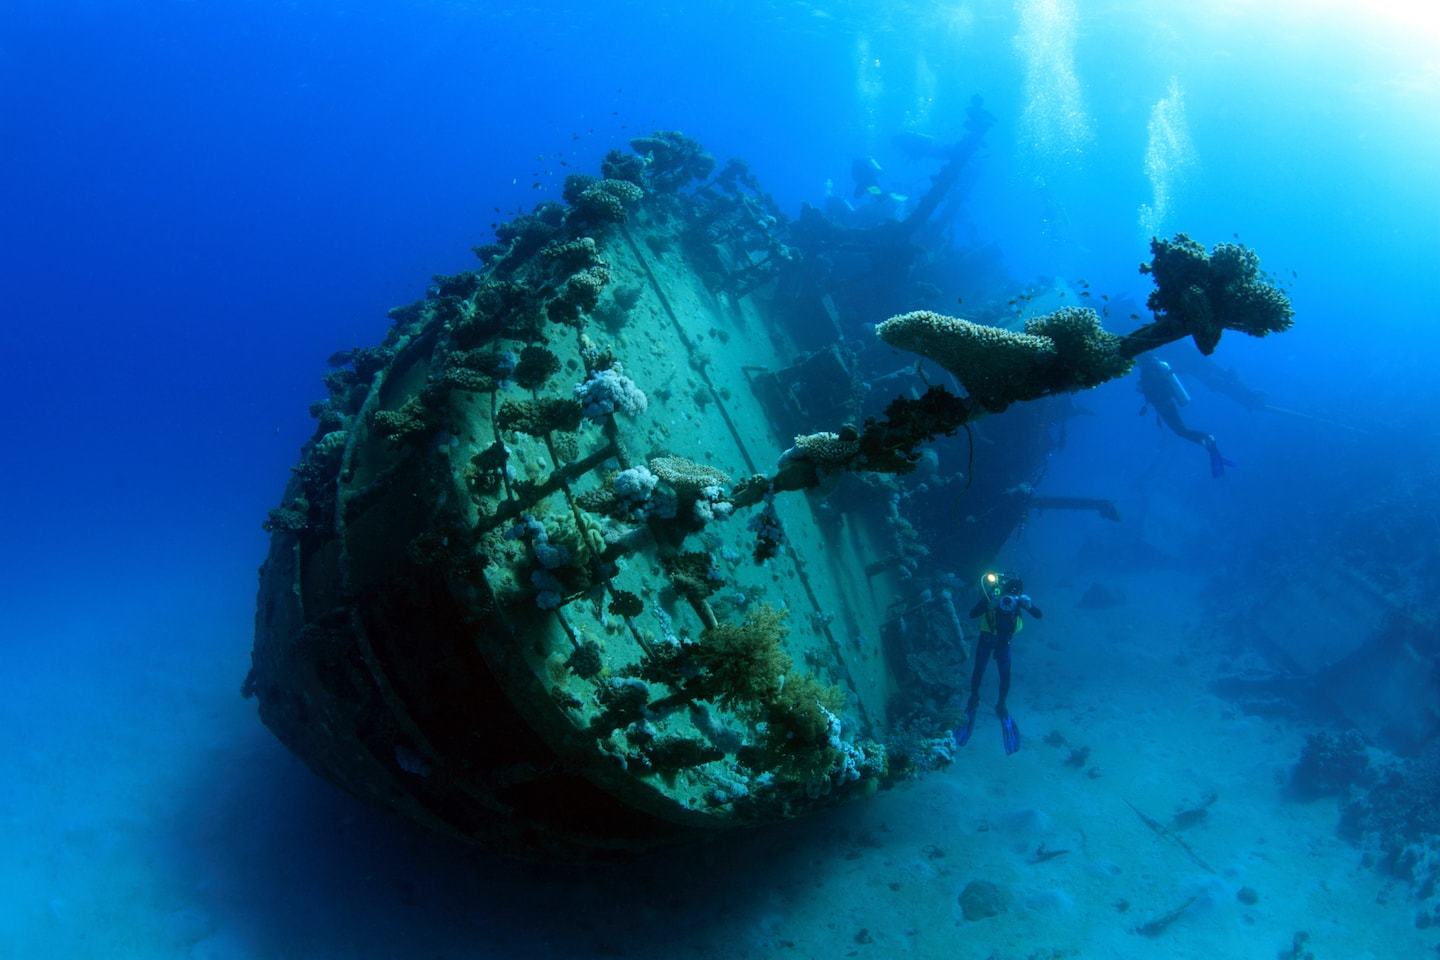 egypt diving: WWII shipwreck in red sea